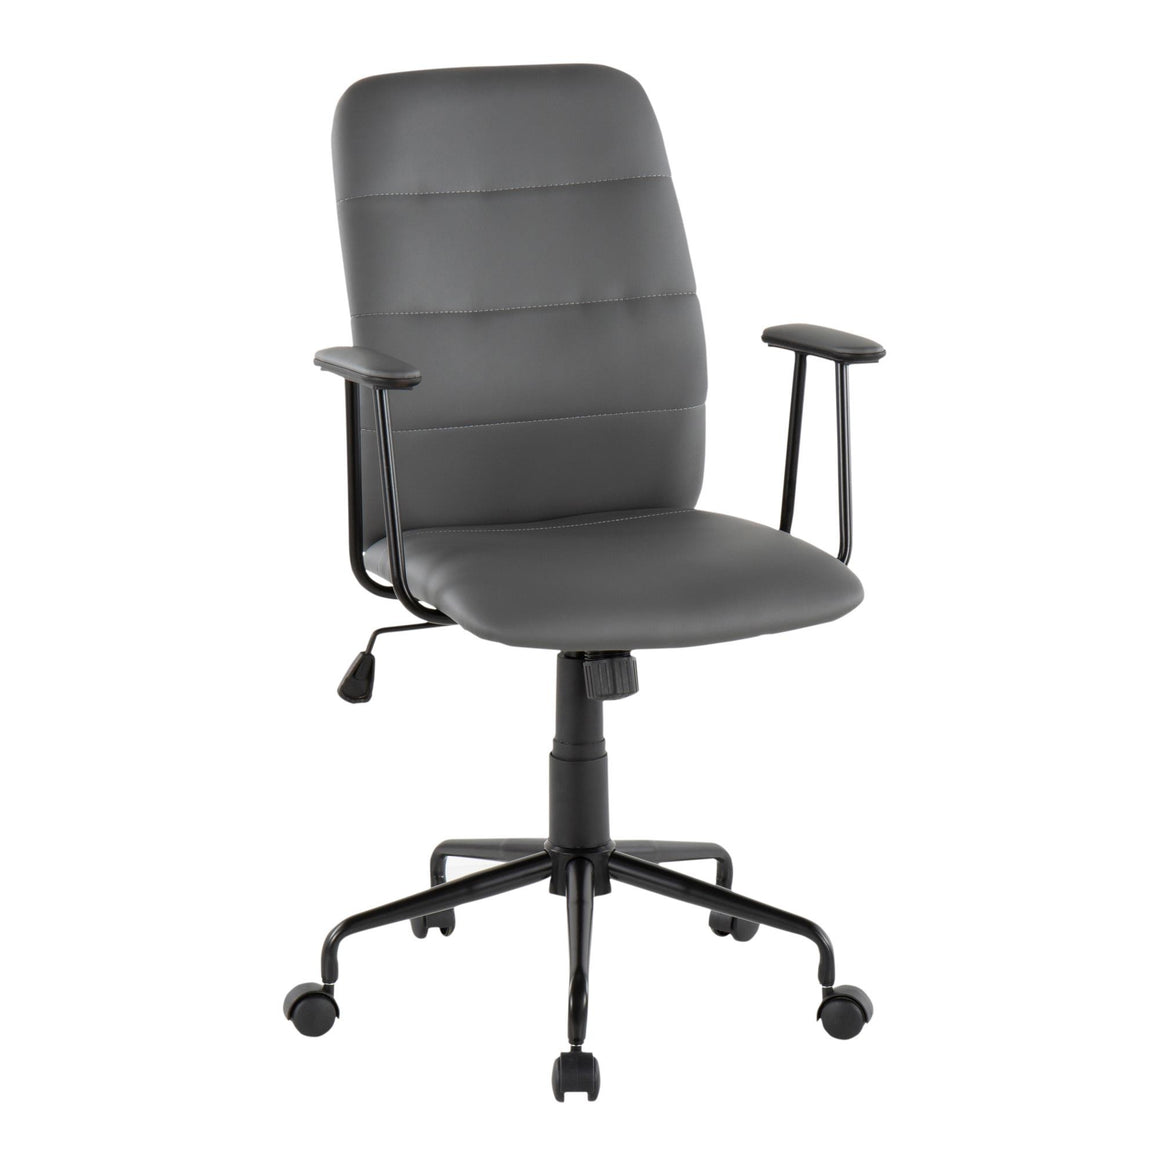 Fredrick Contemporary Office Chair in Grey Faux Leather by Lumisource